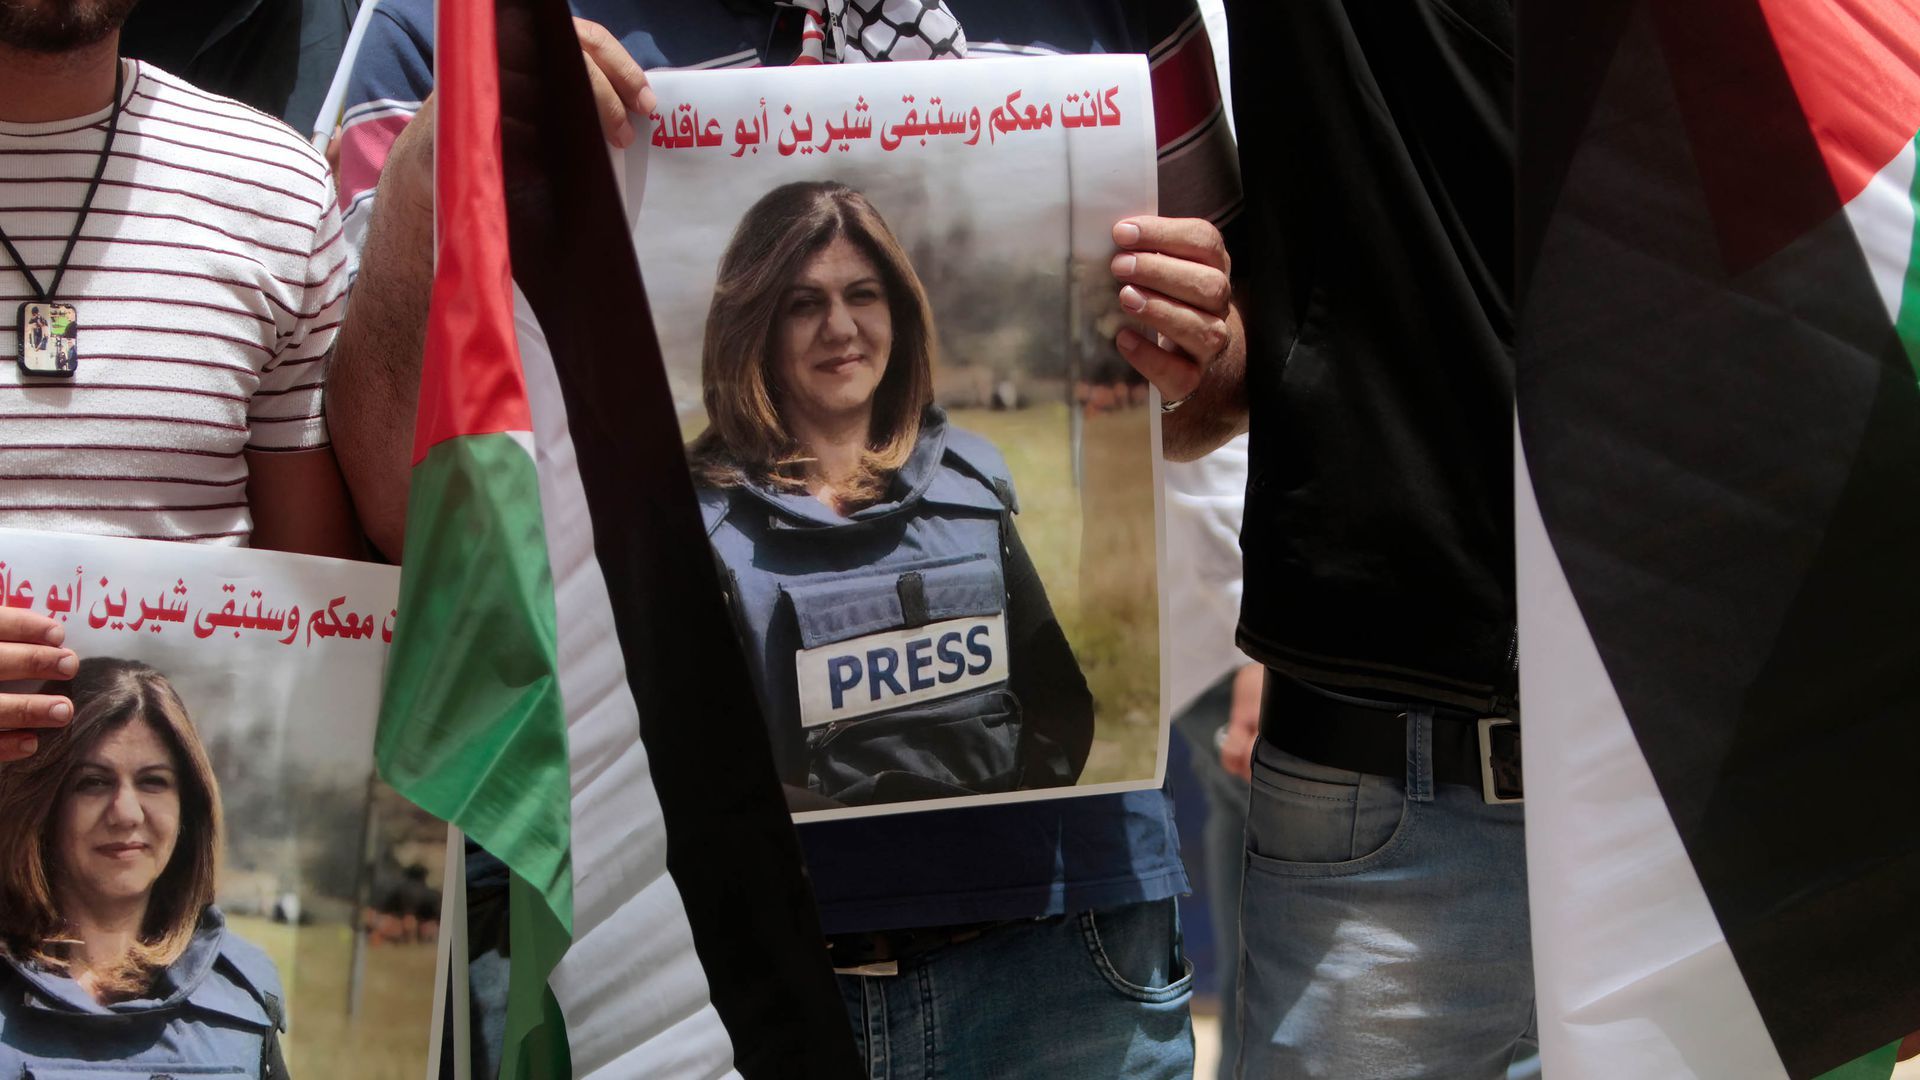 A Palestinian student holds a picture of Shireen Abu Akleh during a protest condemning her murder in Nablus in the occupied West Bank. Photo: Nasser Ishtayeh/SOPA Images/LightRocket via Getty Images